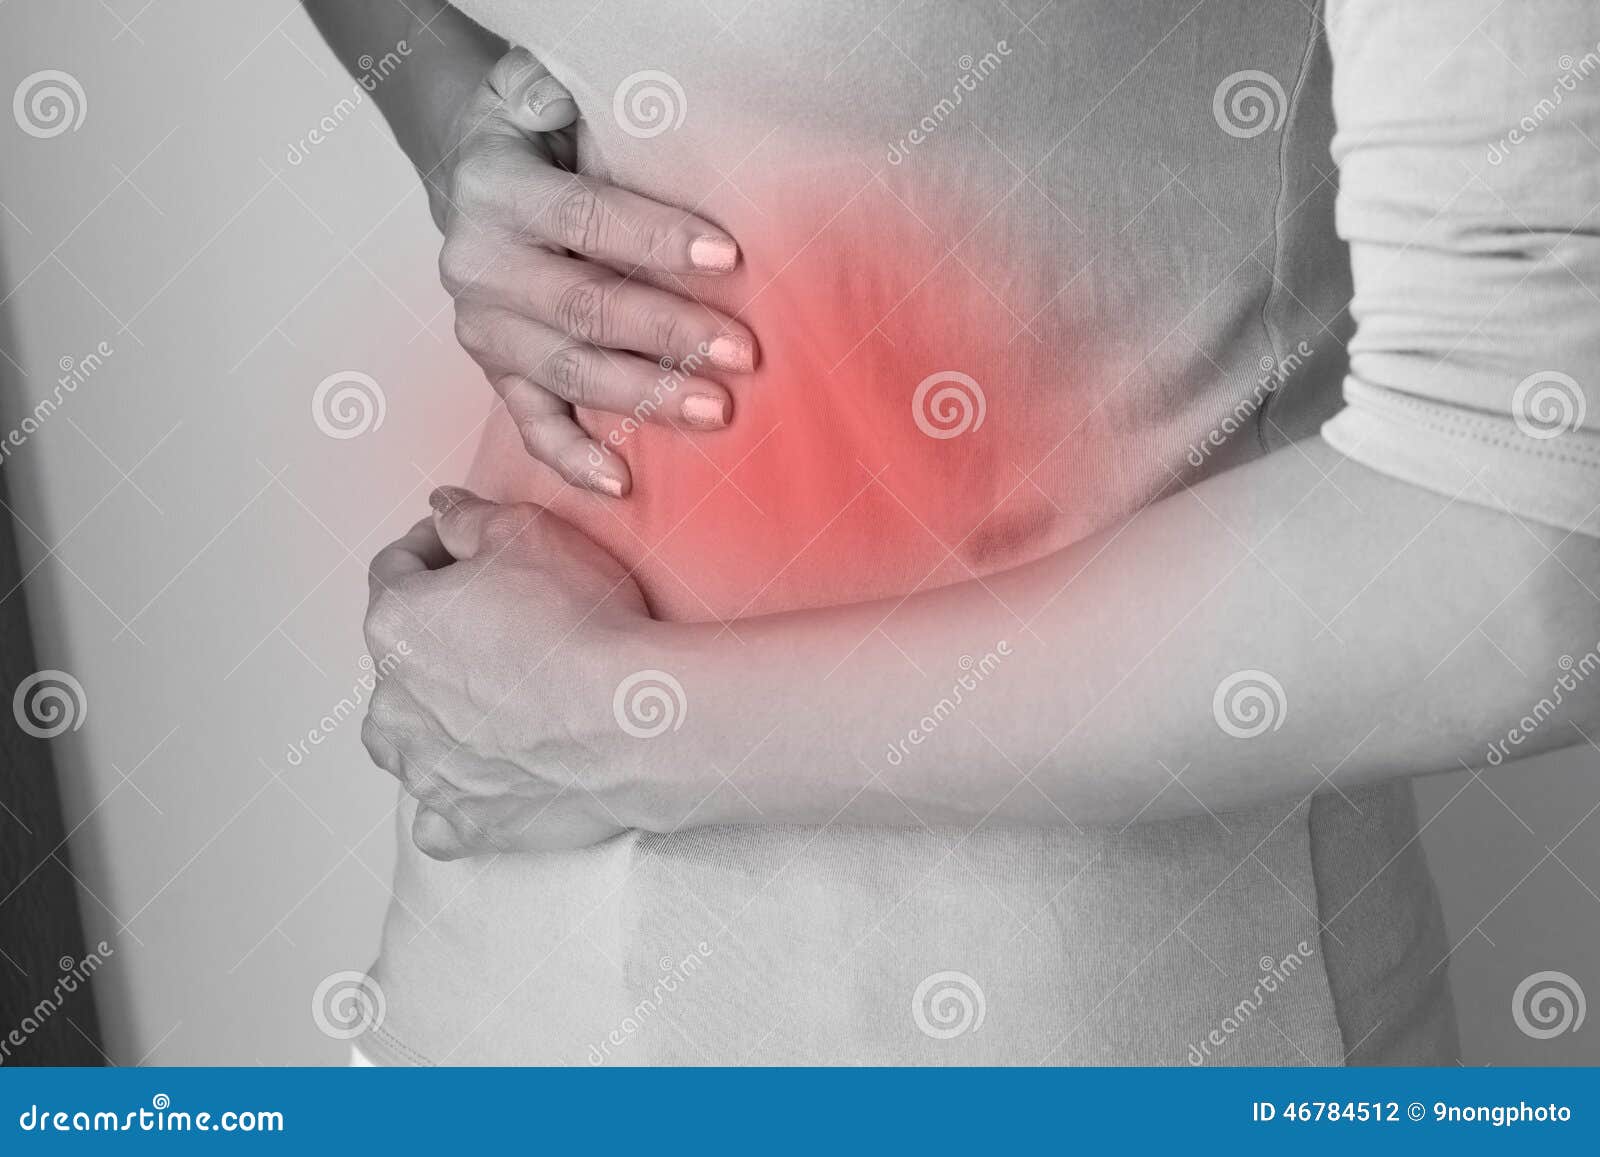 menstruation pain or stomach ache, hand holding belly